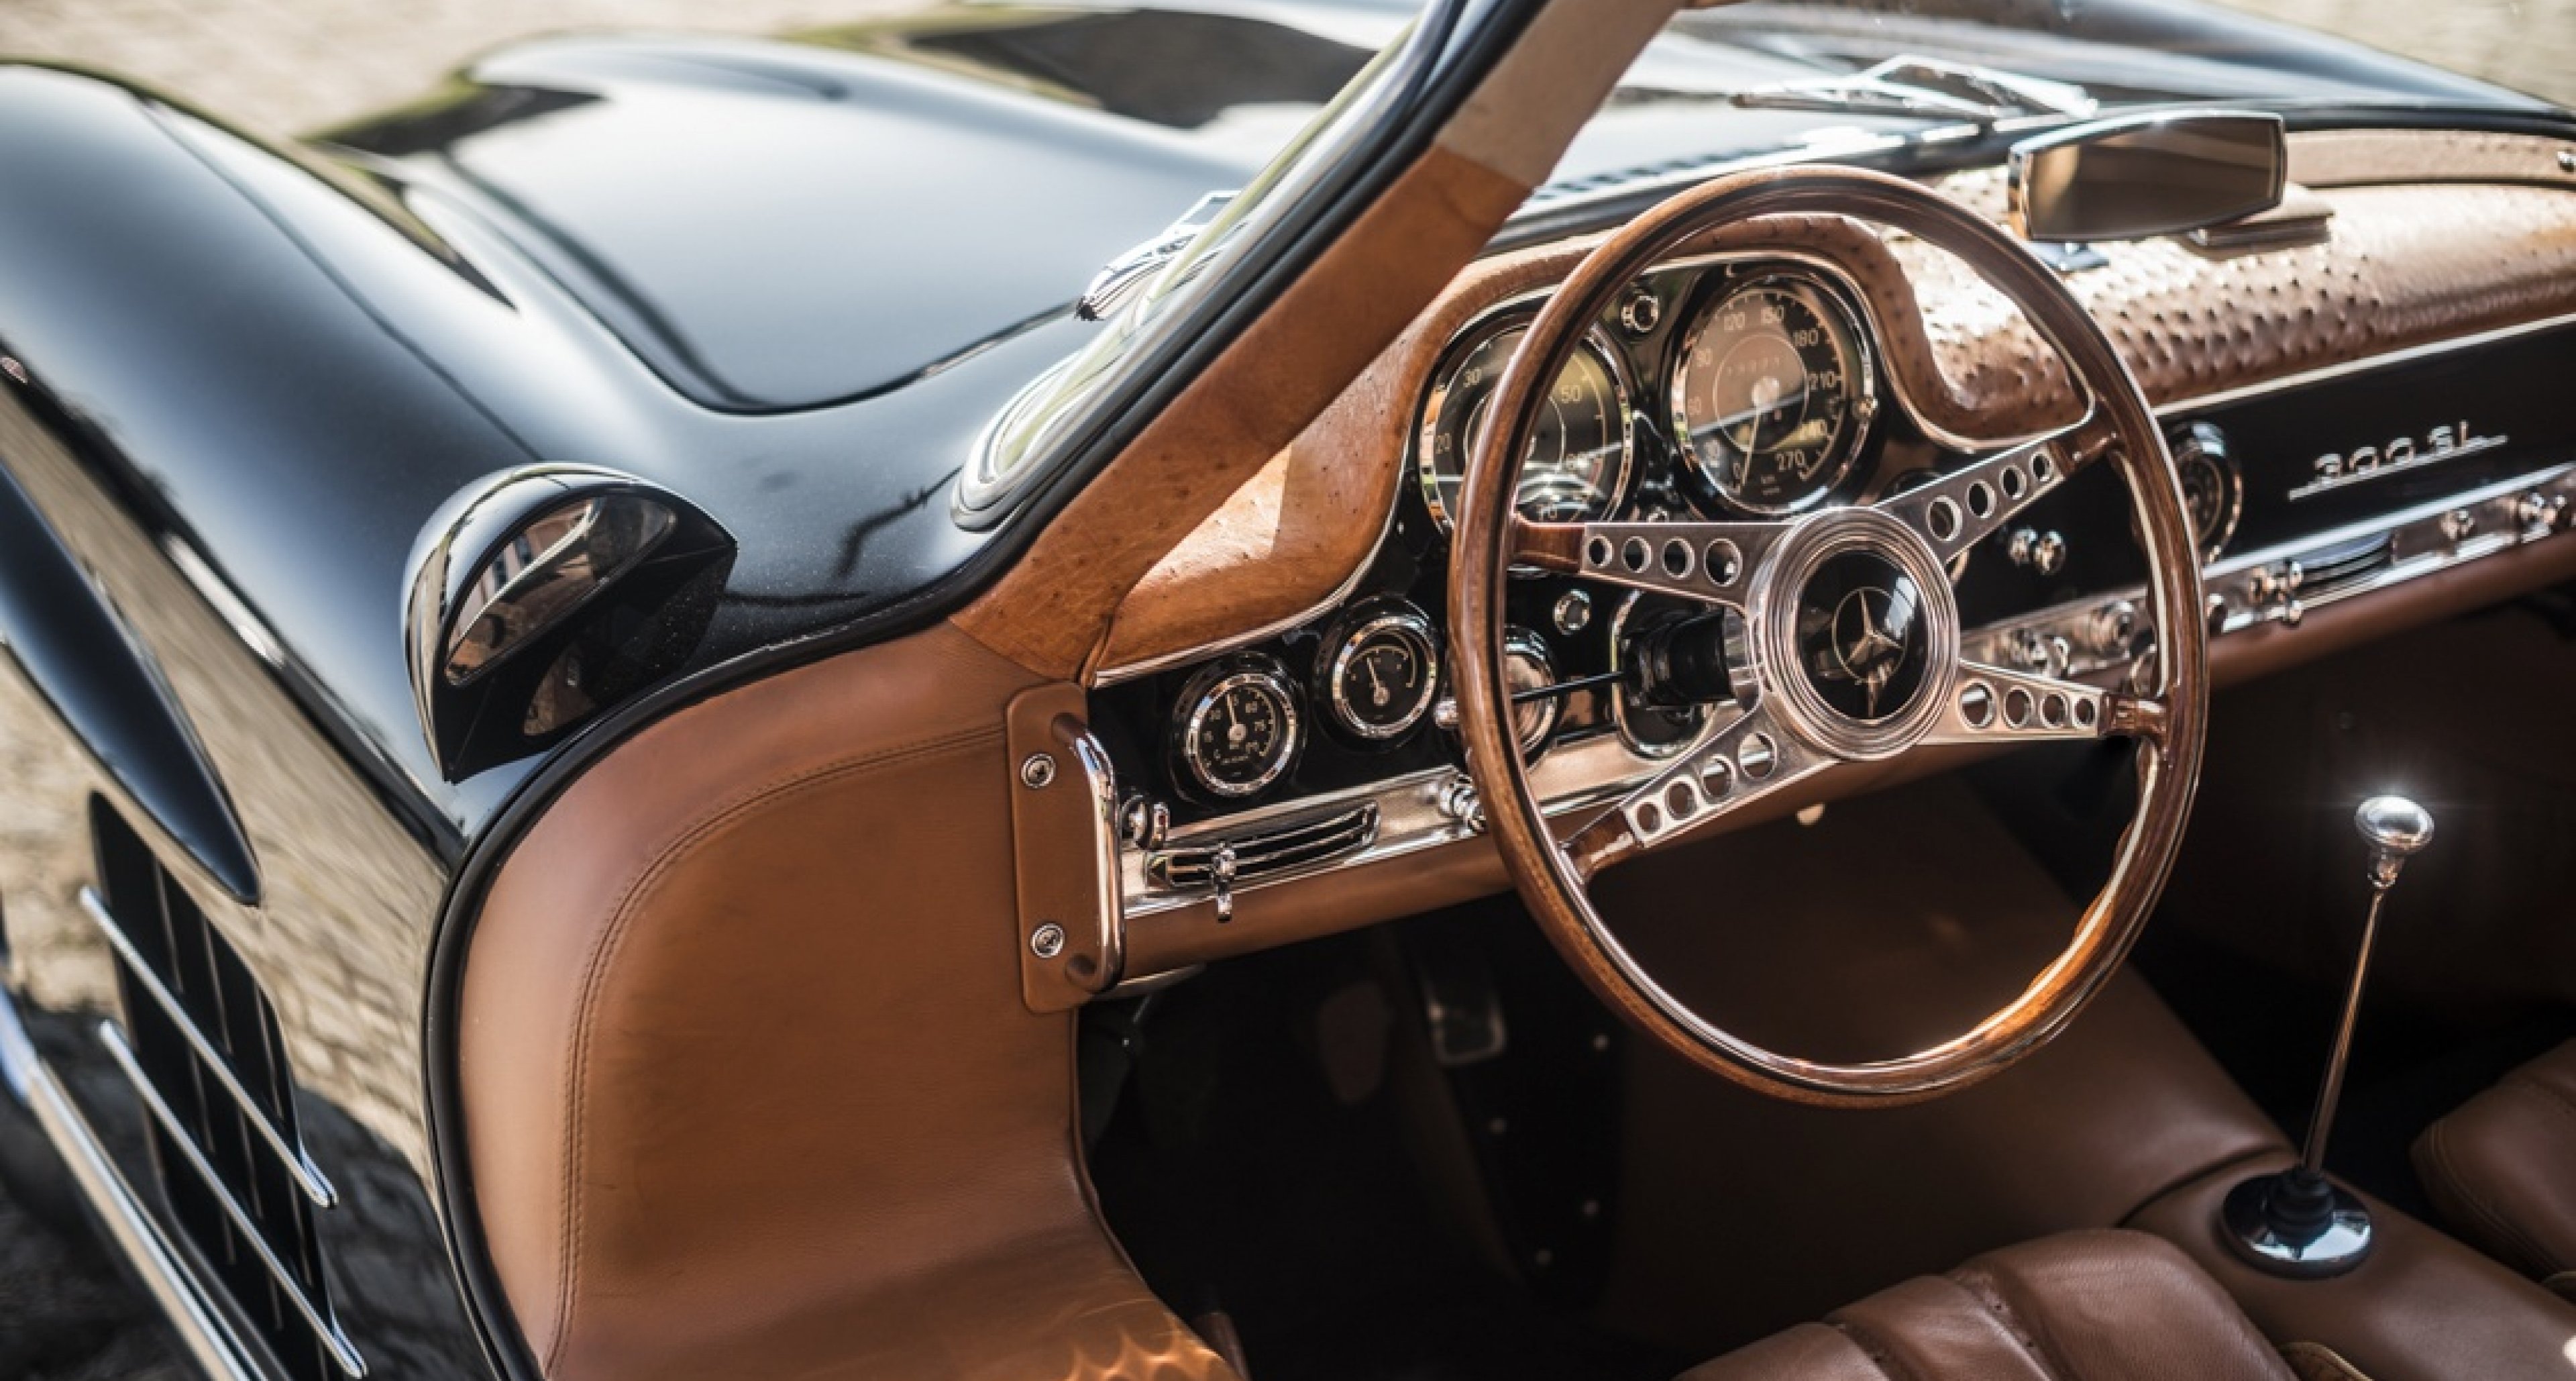 Why This Mercedes Benz 300 Sl Outlaw Shouldn T Be Exiled